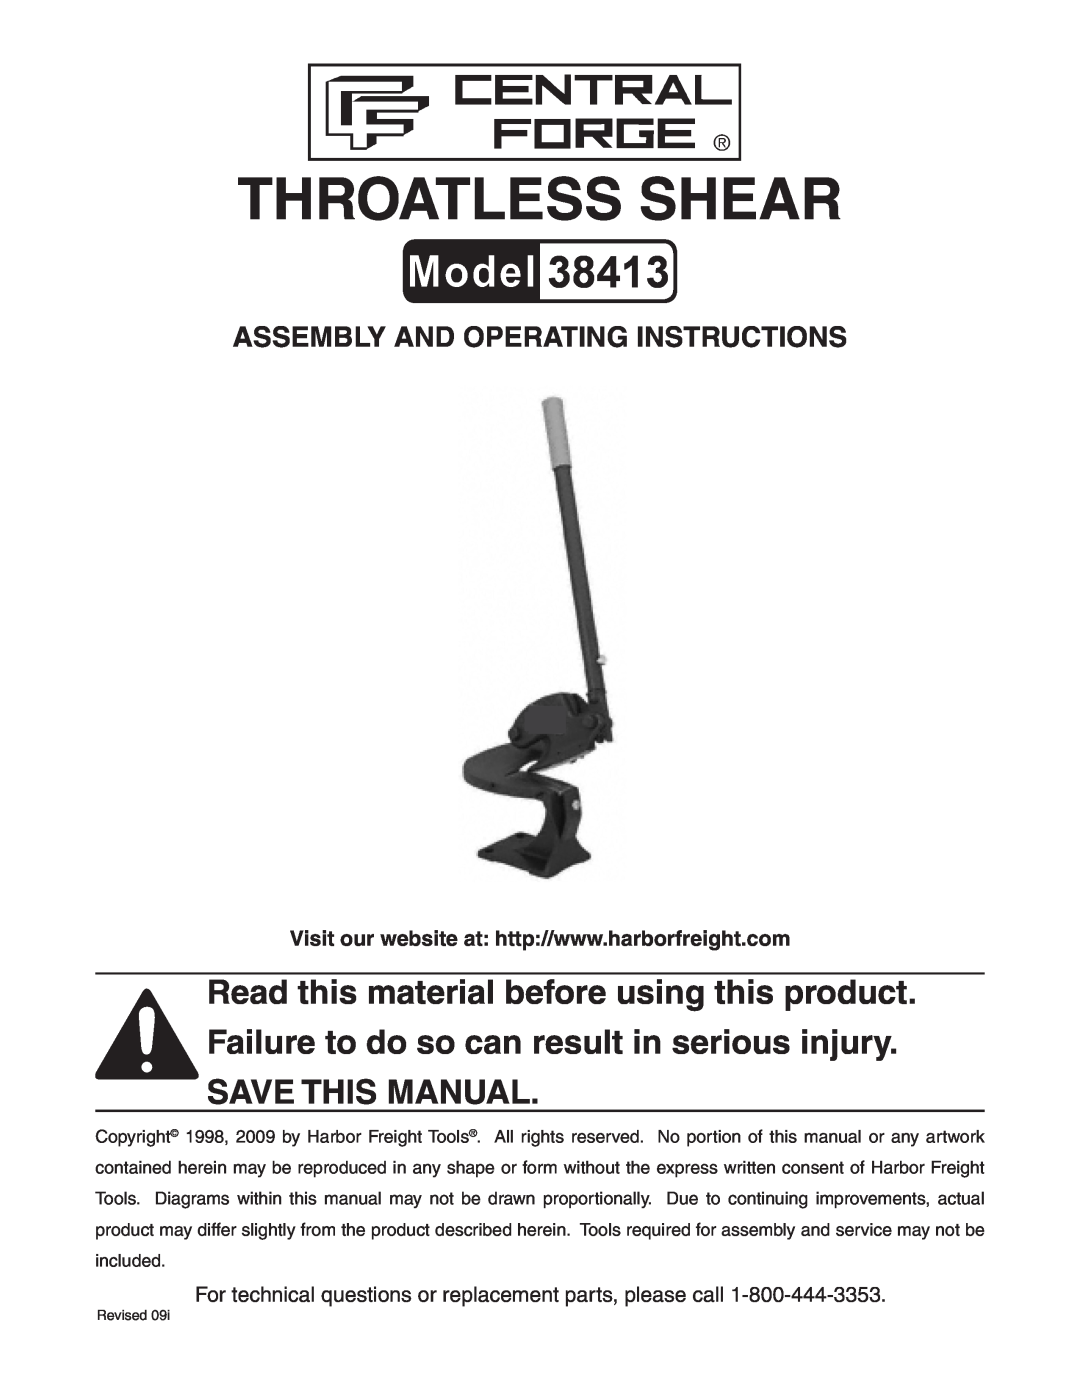 Harbor Freight Tools 38413 manual Assembly And Operating Instructions, Throatless Shear 